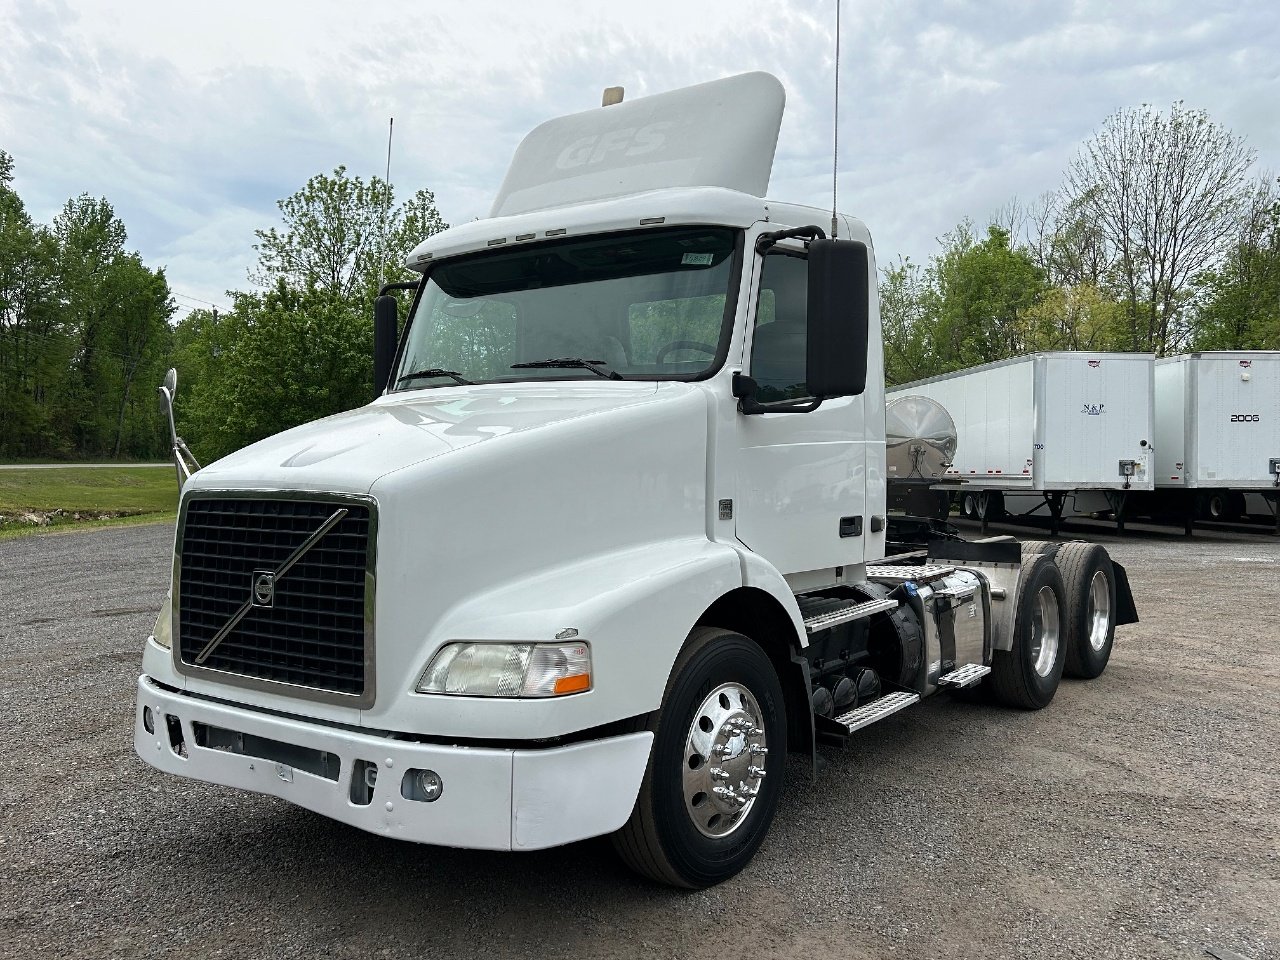 USED 2012 VOLVO VNM64T200 TANDEM AXLE DAYCAB TRUCK #15187